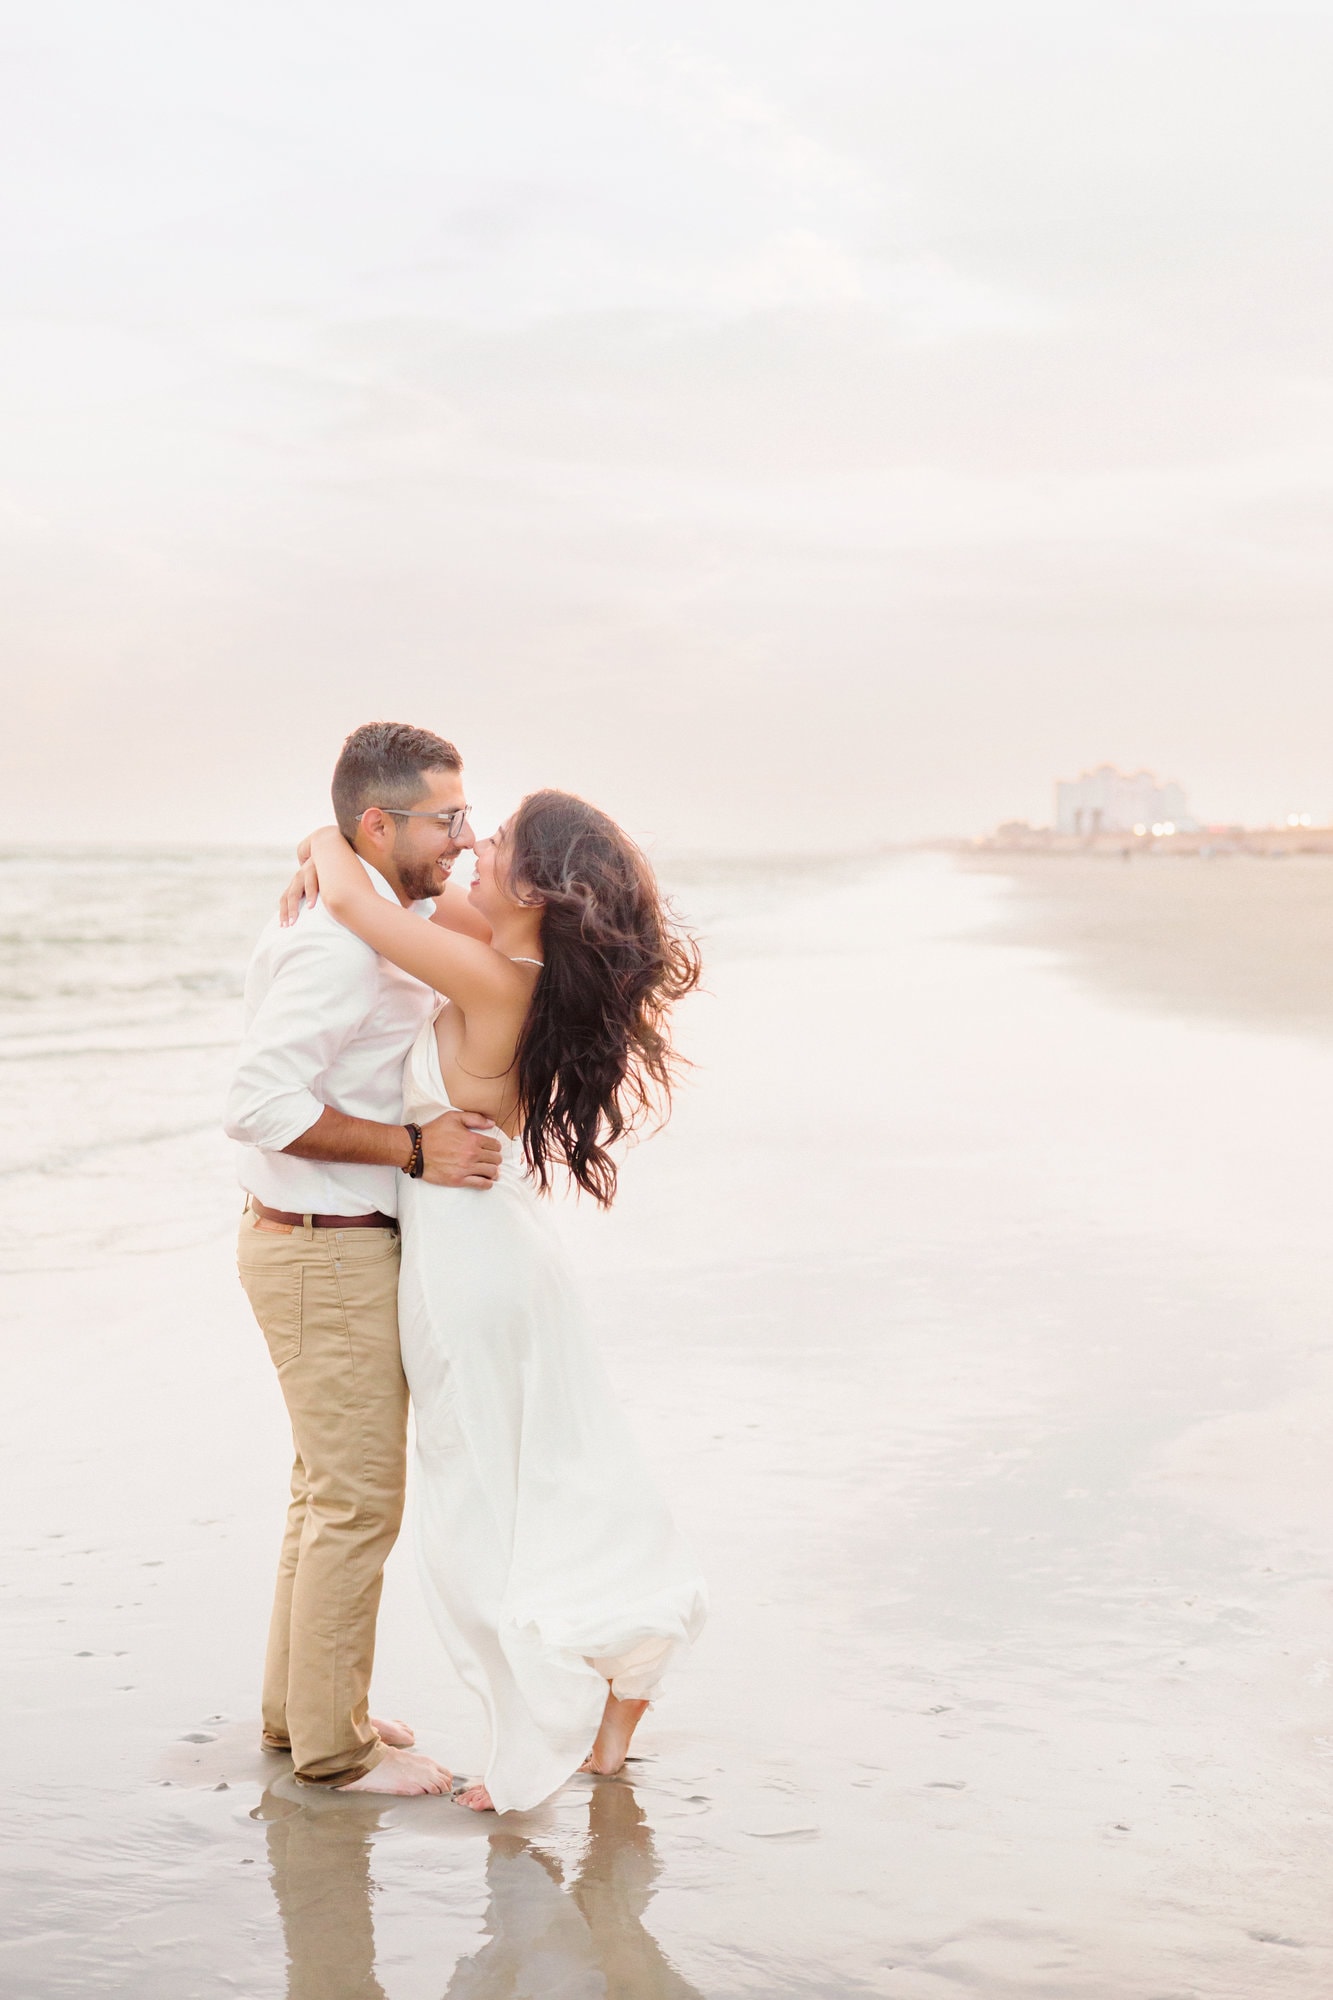 The couple twirls on the sand during their engagement pictures on the beach as the wind whips her hair and dress.